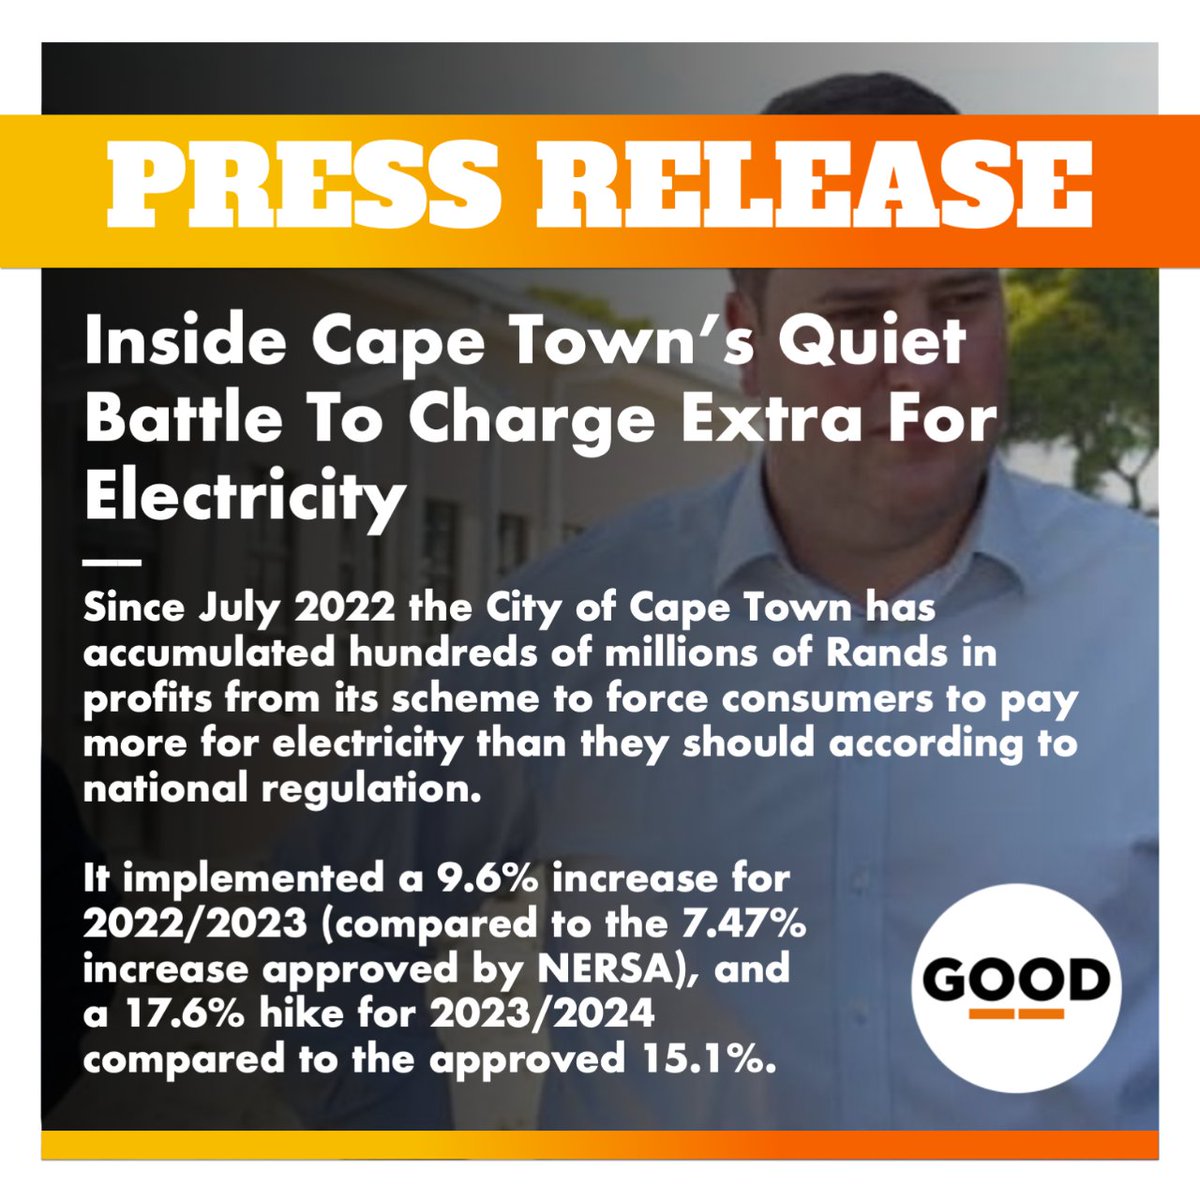 For the past two years the City has been quietly litigating, at ratepayers’ expense, against NERSA for court permission to ignore the nationally regulated tariff.  Consumers are funding the City’s case to be able to charge them extra! PRESS RELEASE: i.mtr.cool/qflksirdru